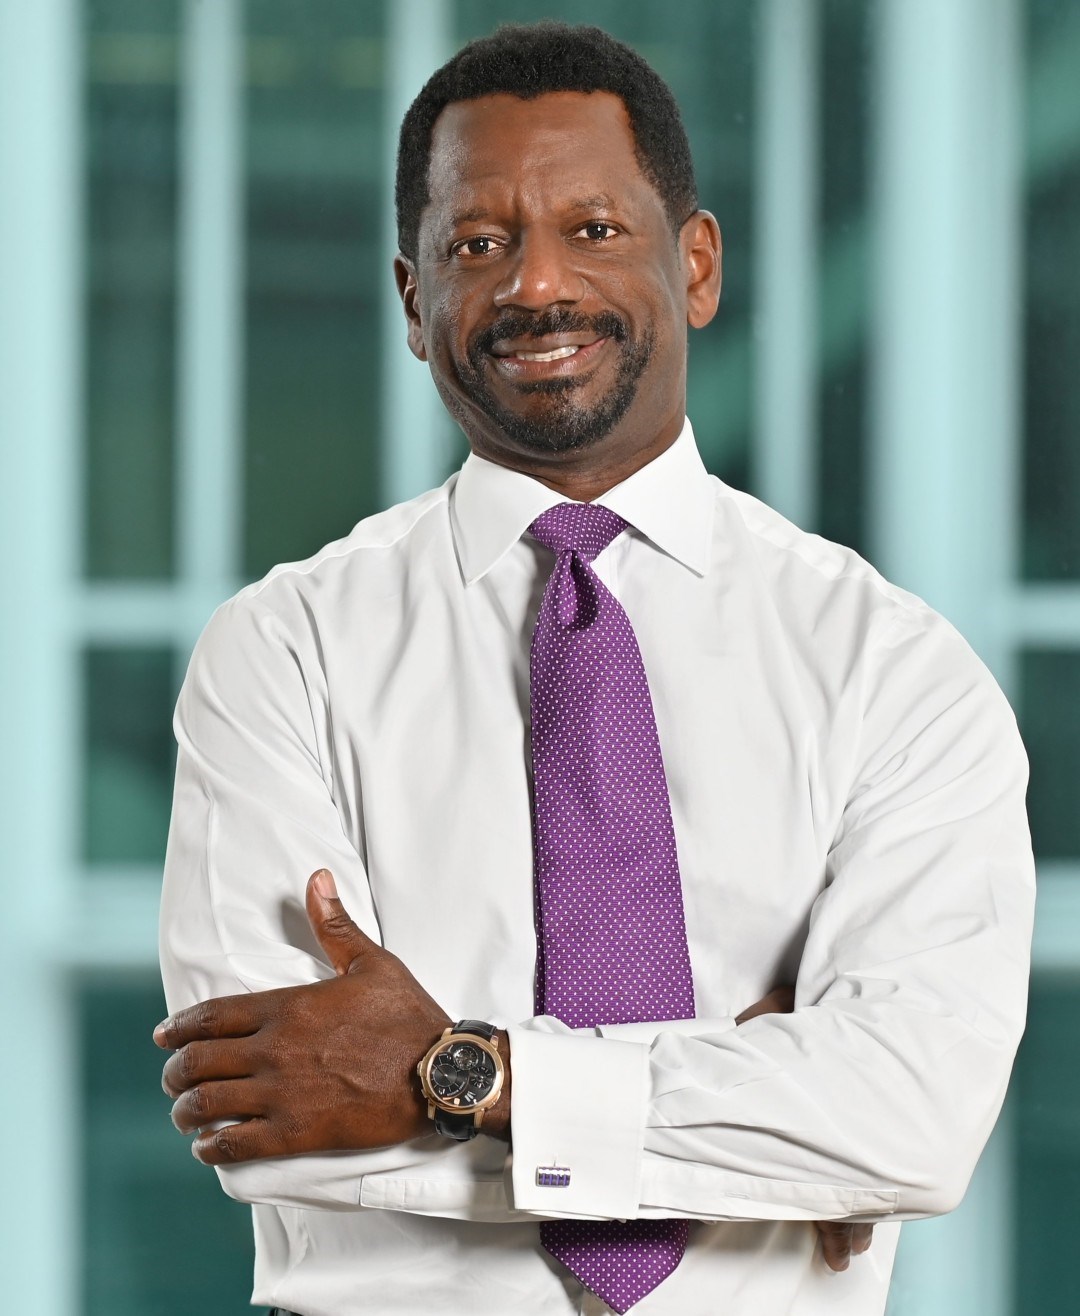 Black man with arms crossed smiling at camera